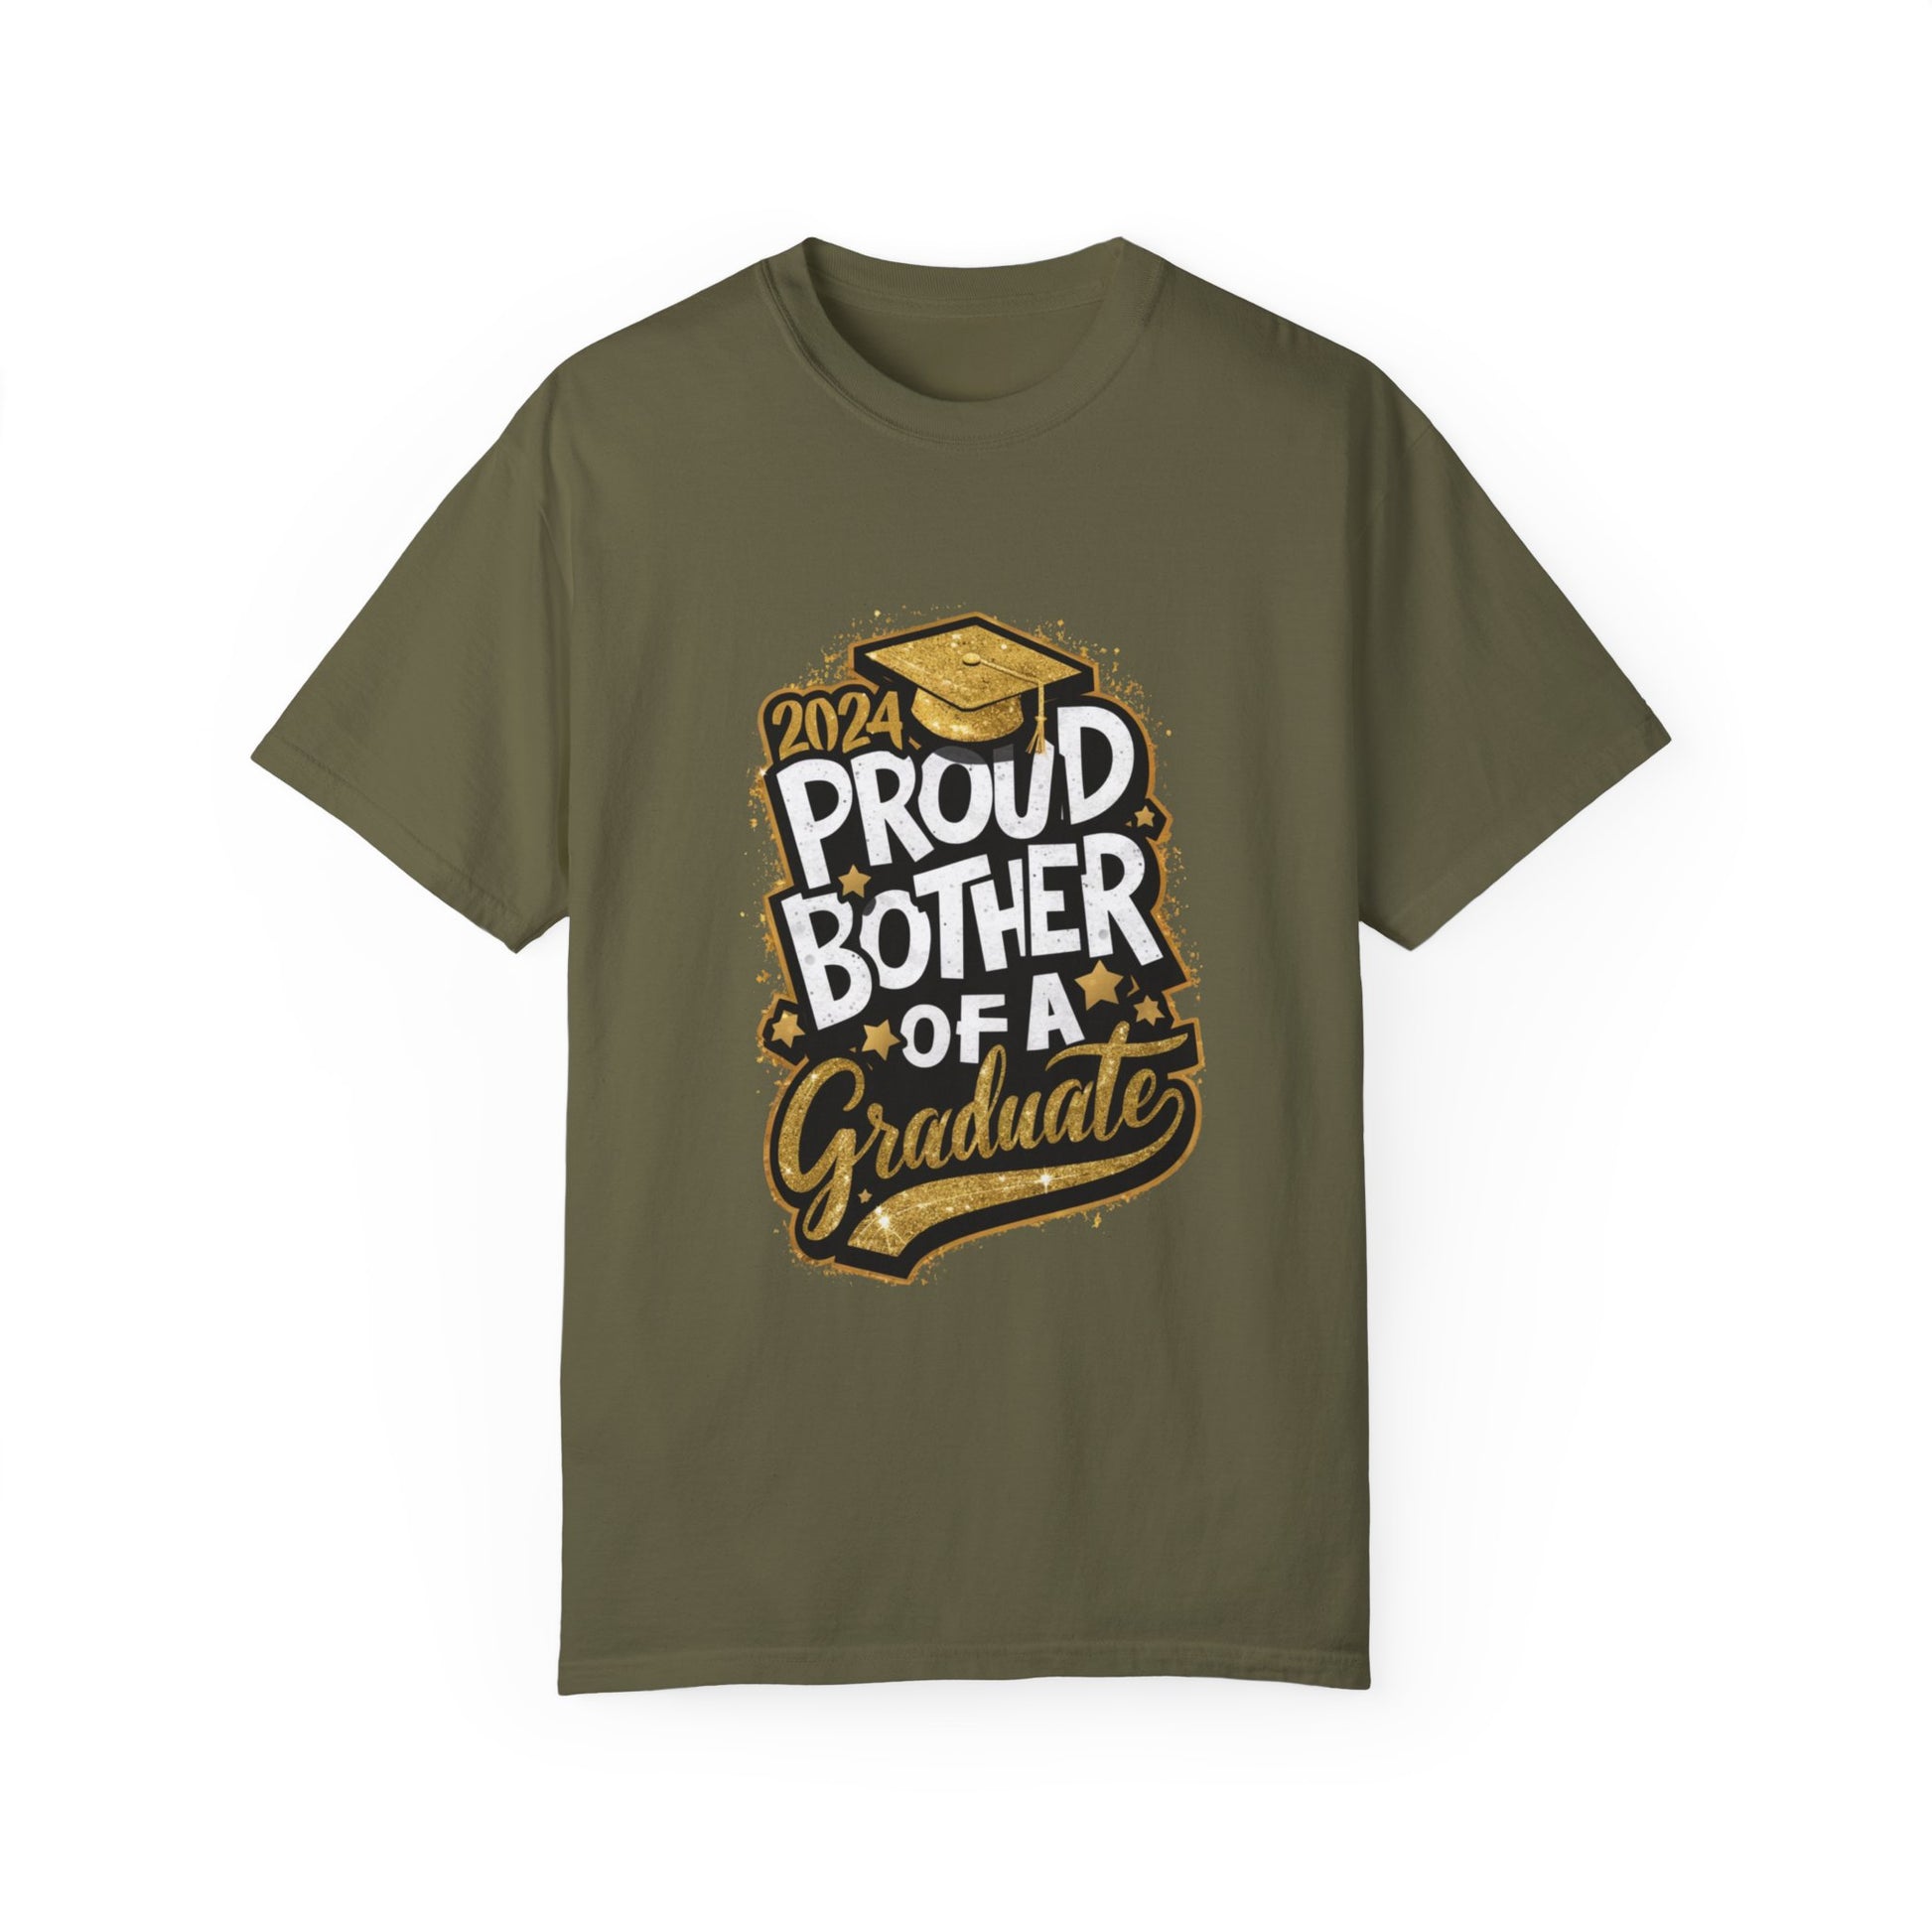 Proud Brother of a 2024 Graduate Unisex Garment-dyed T-shirt Cotton Funny Humorous Graphic Soft Premium Unisex Men Women Sage T-shirt Birthday Gift-13